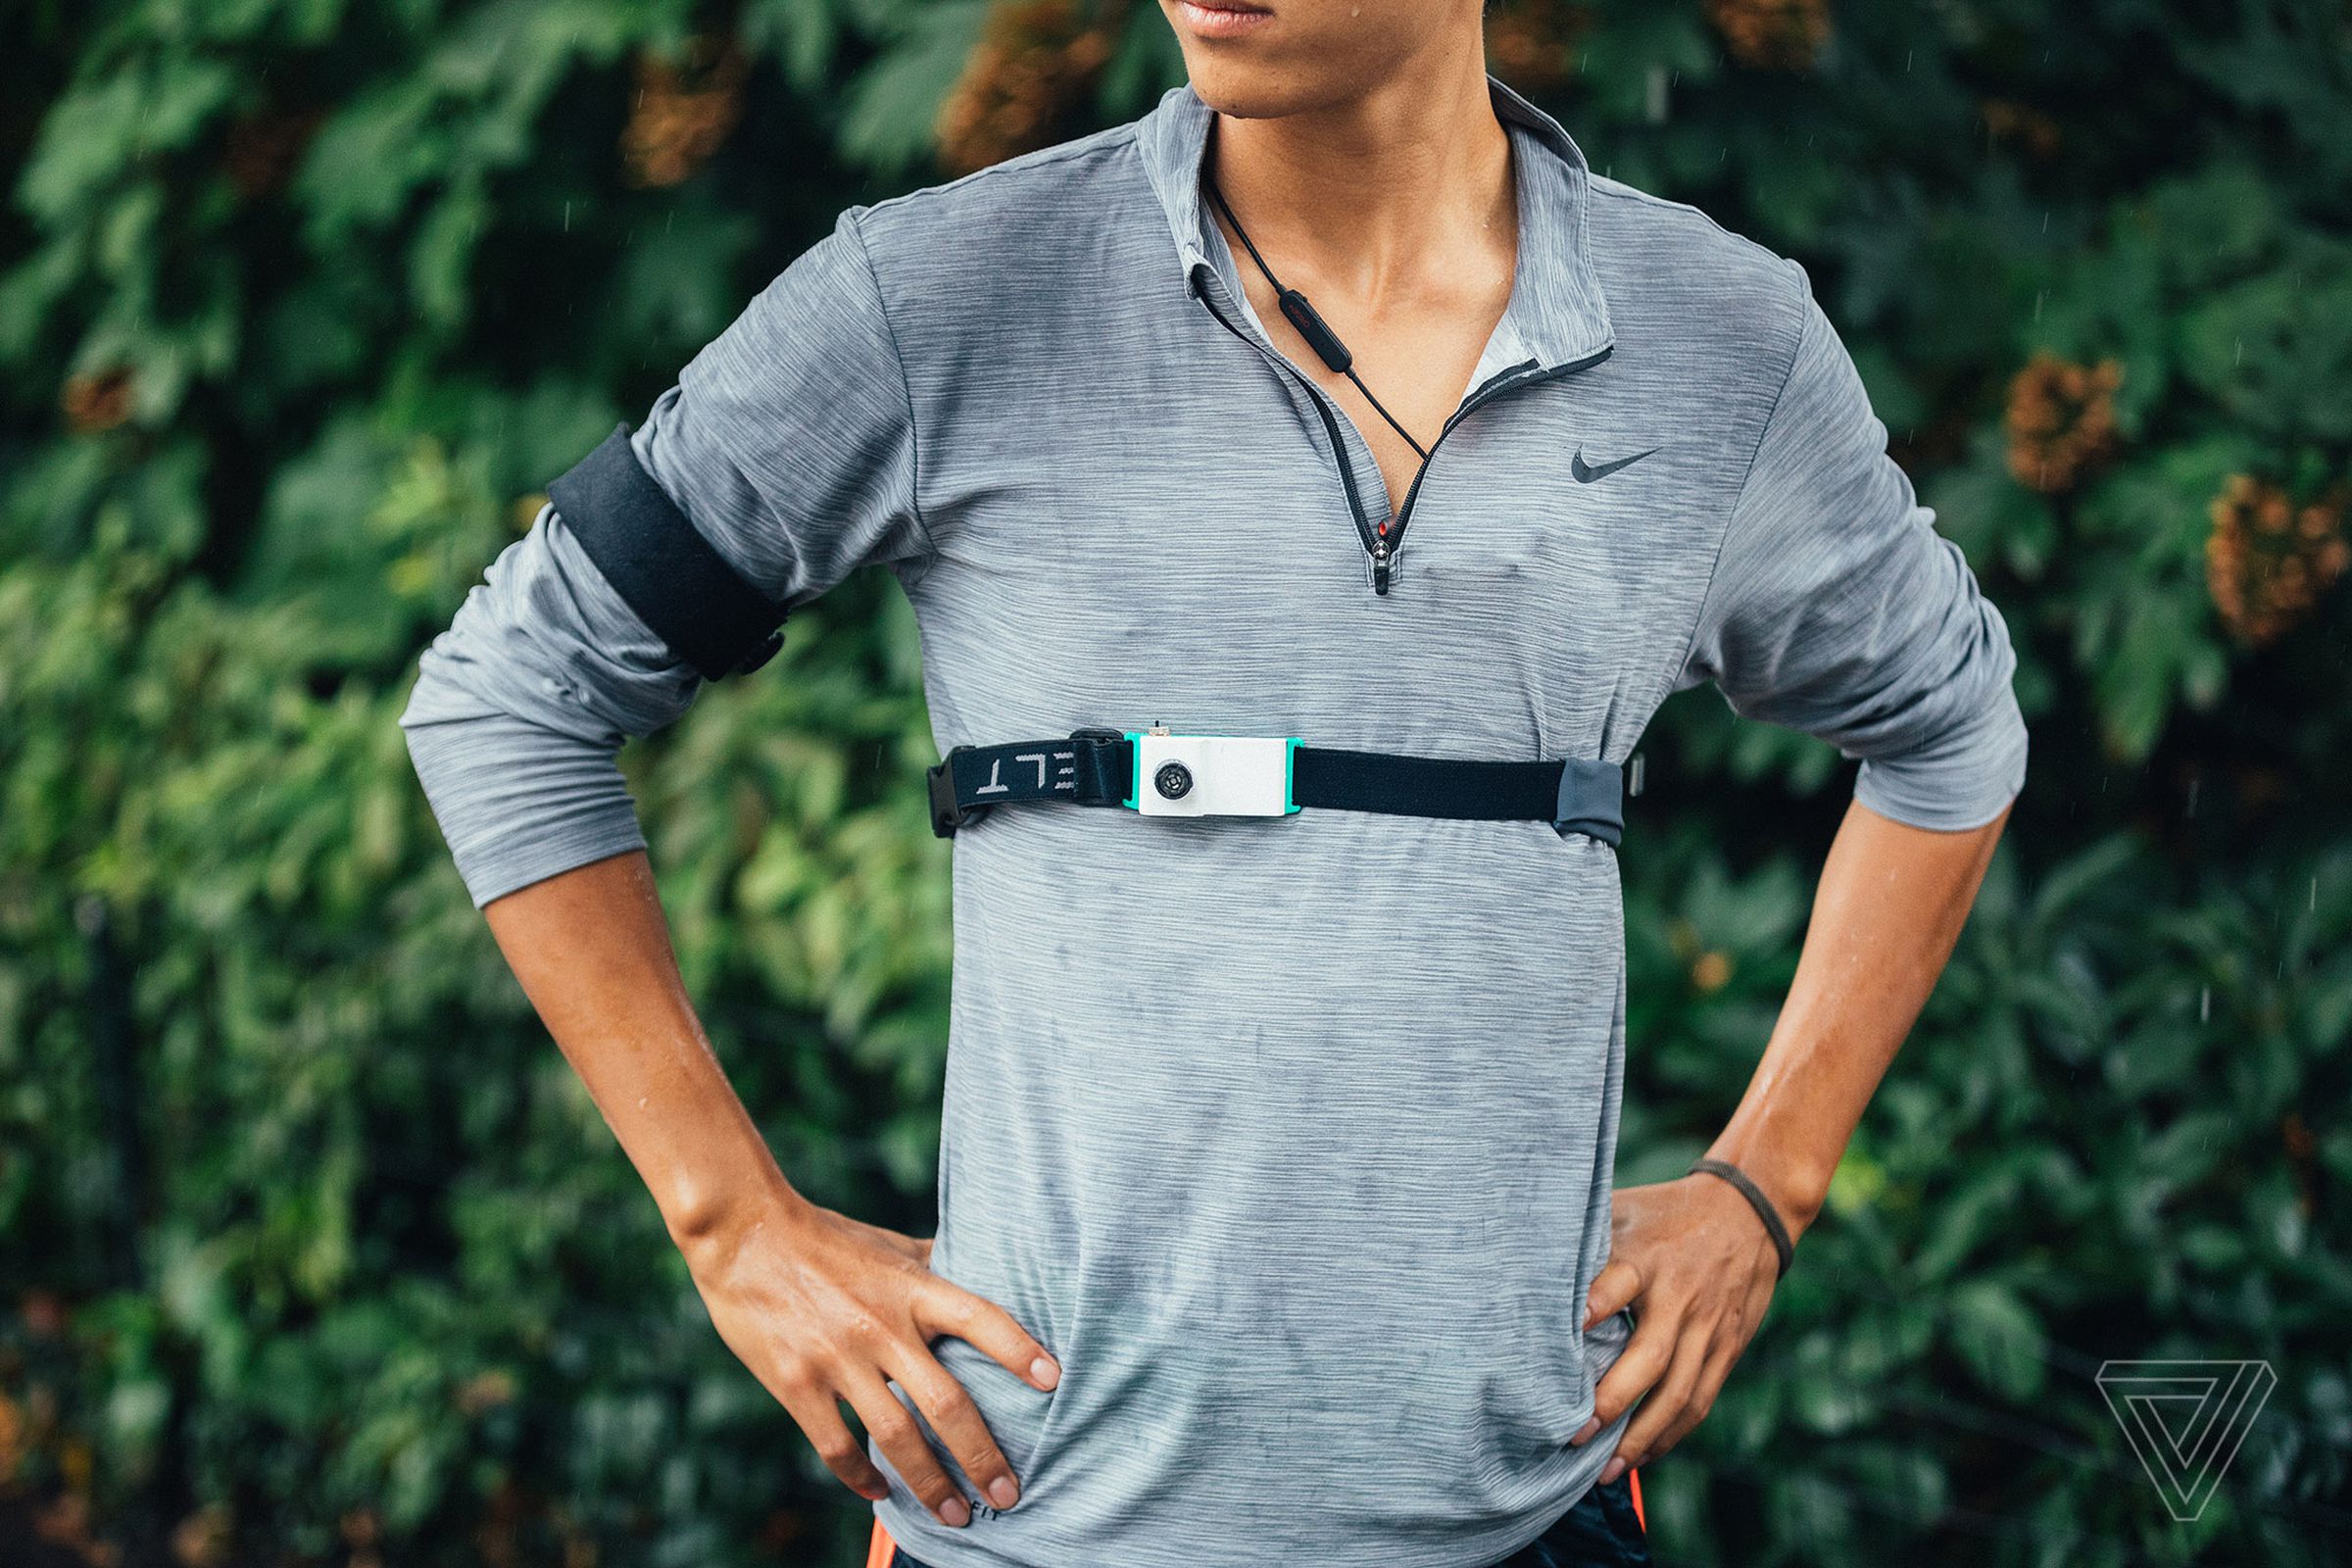 WearWorks co-founder Kevin Yoo wearing the Tortoise, the ultrasonic device the team created to help Wheatcroft micro-navigate